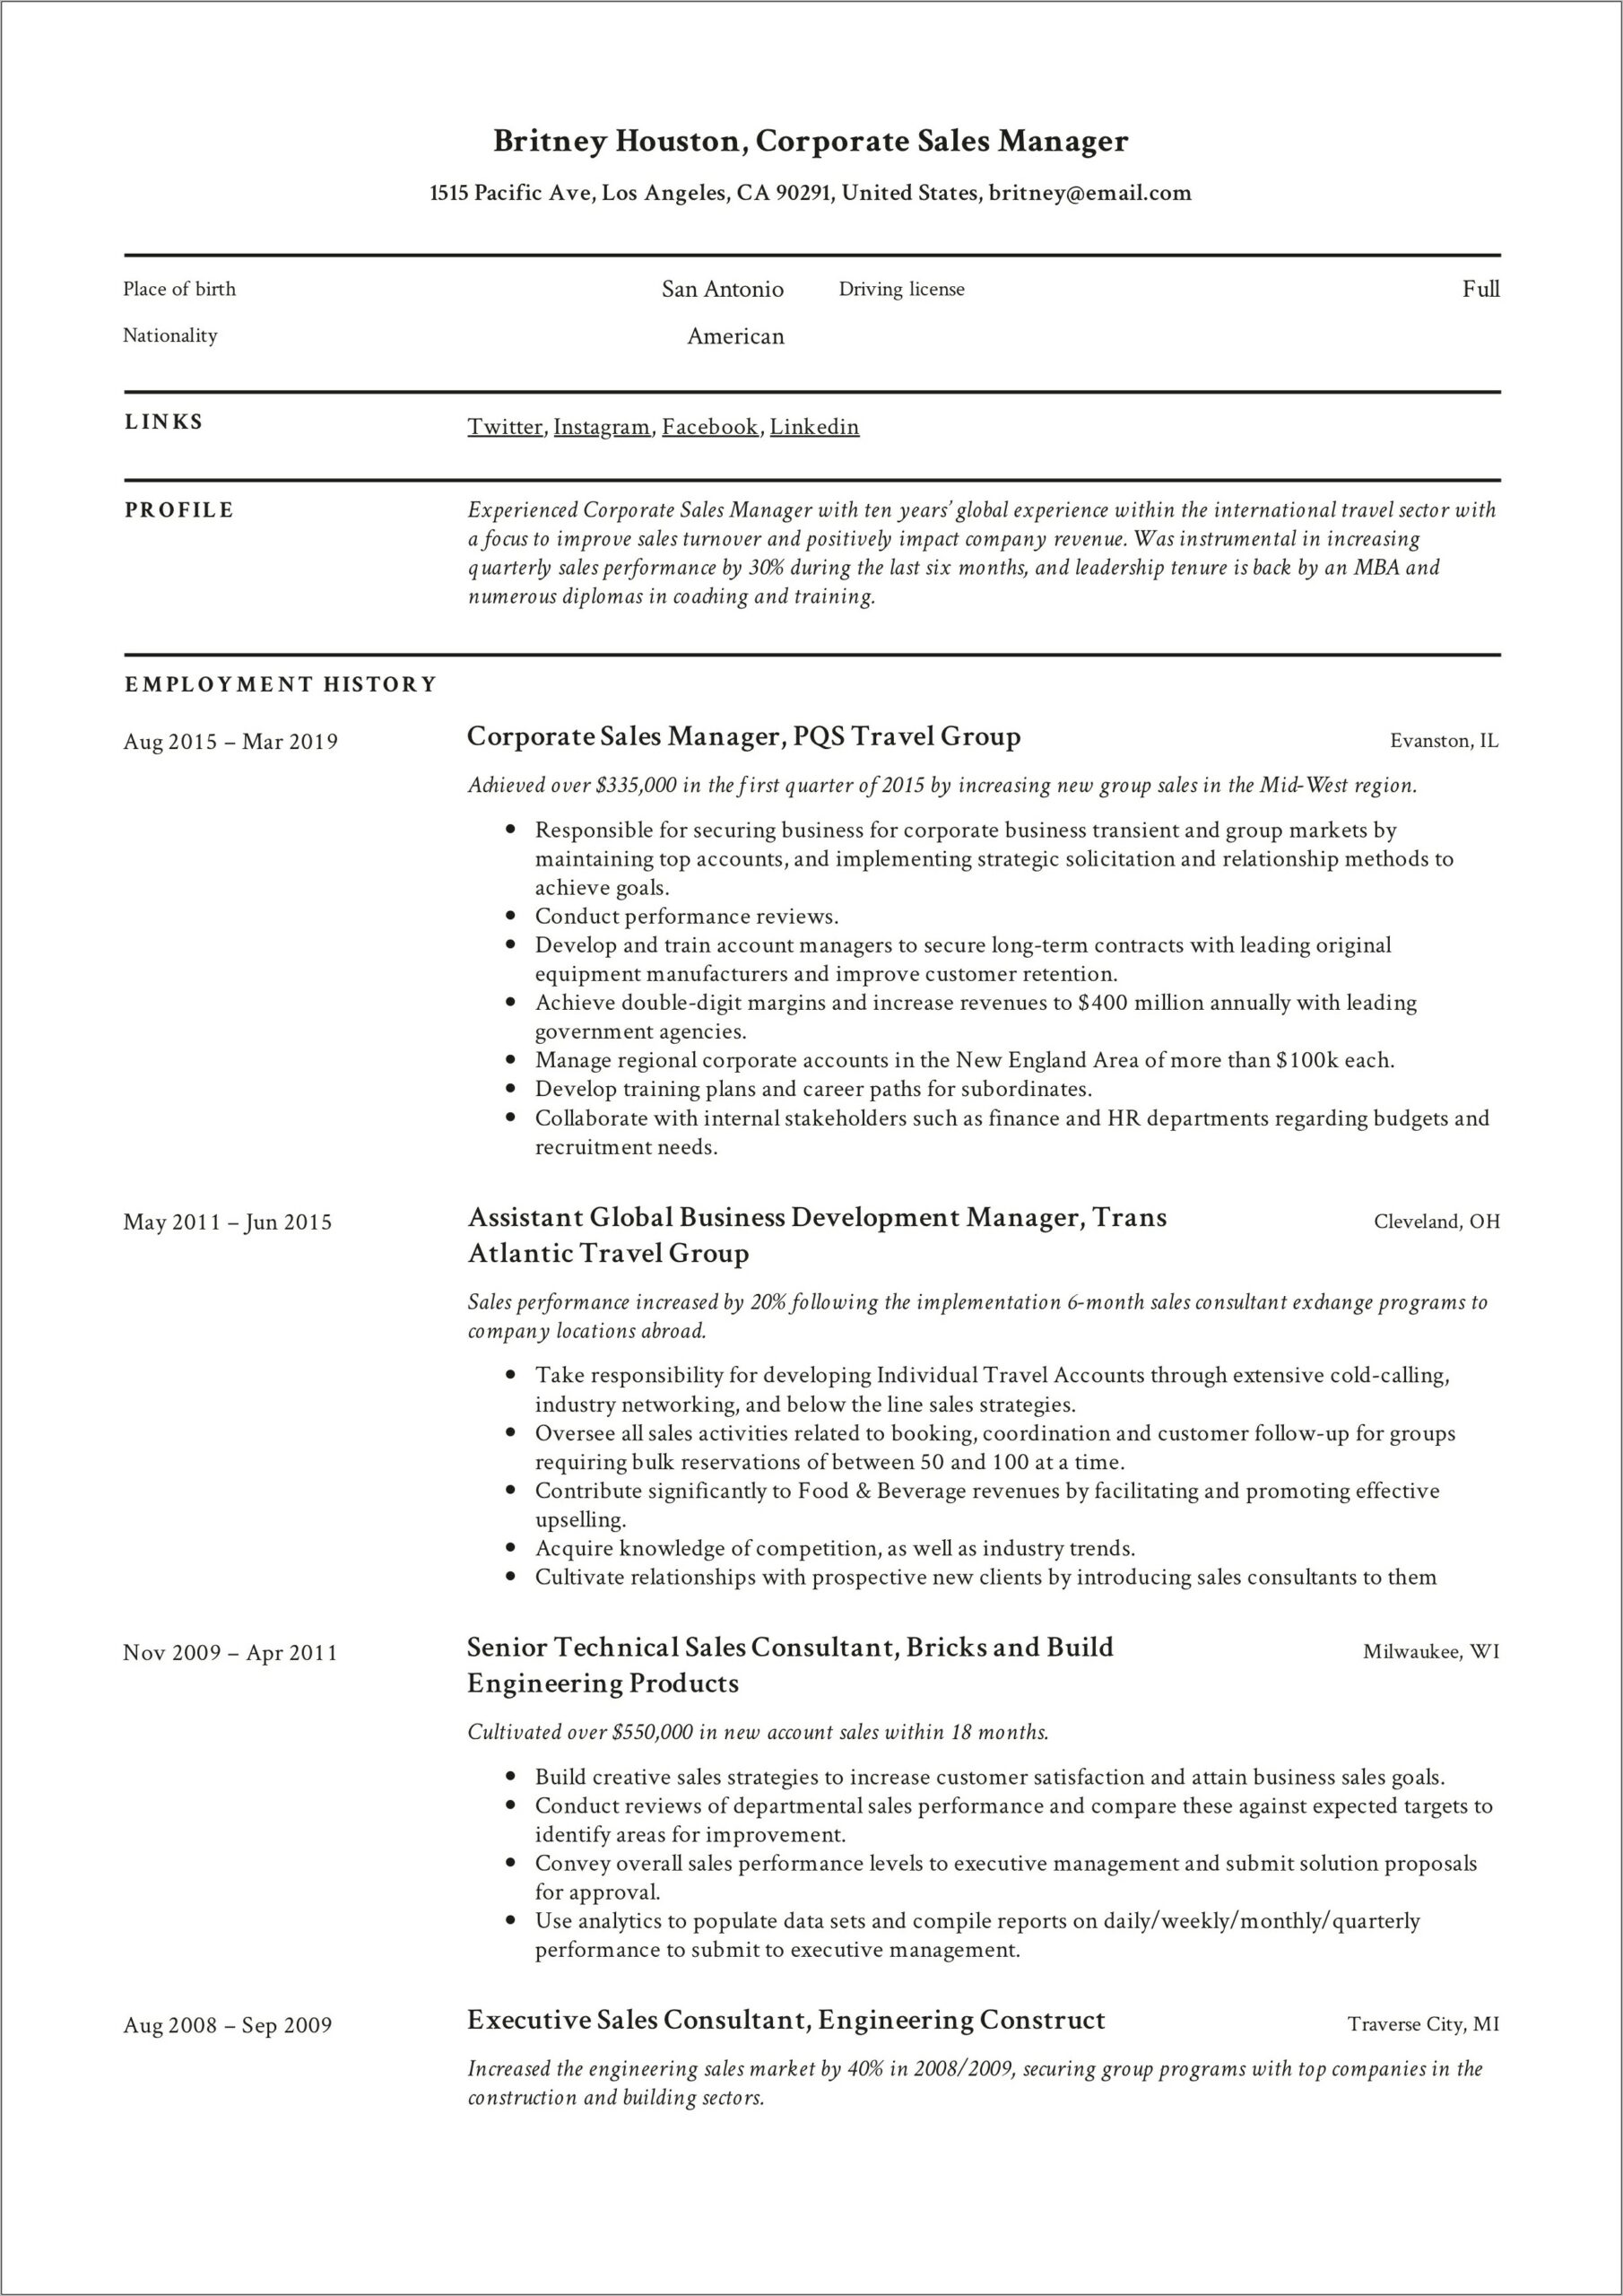 Sales Manager Resume Examples 2017